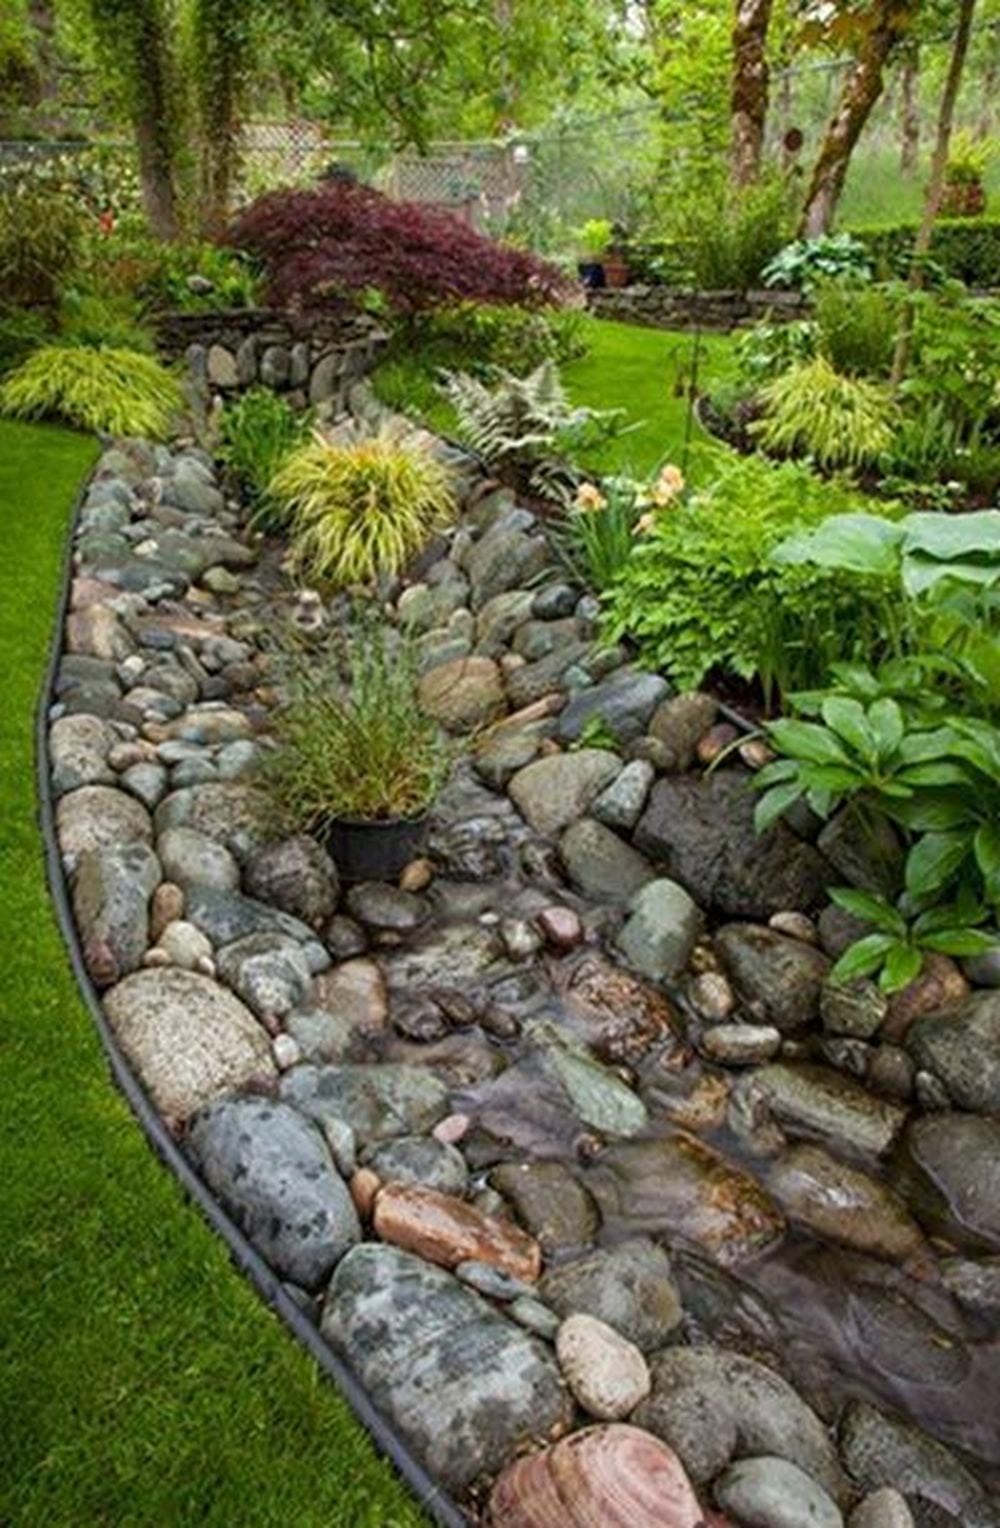 How to Install a Dry Creek Bed - DIY projects for everyone!